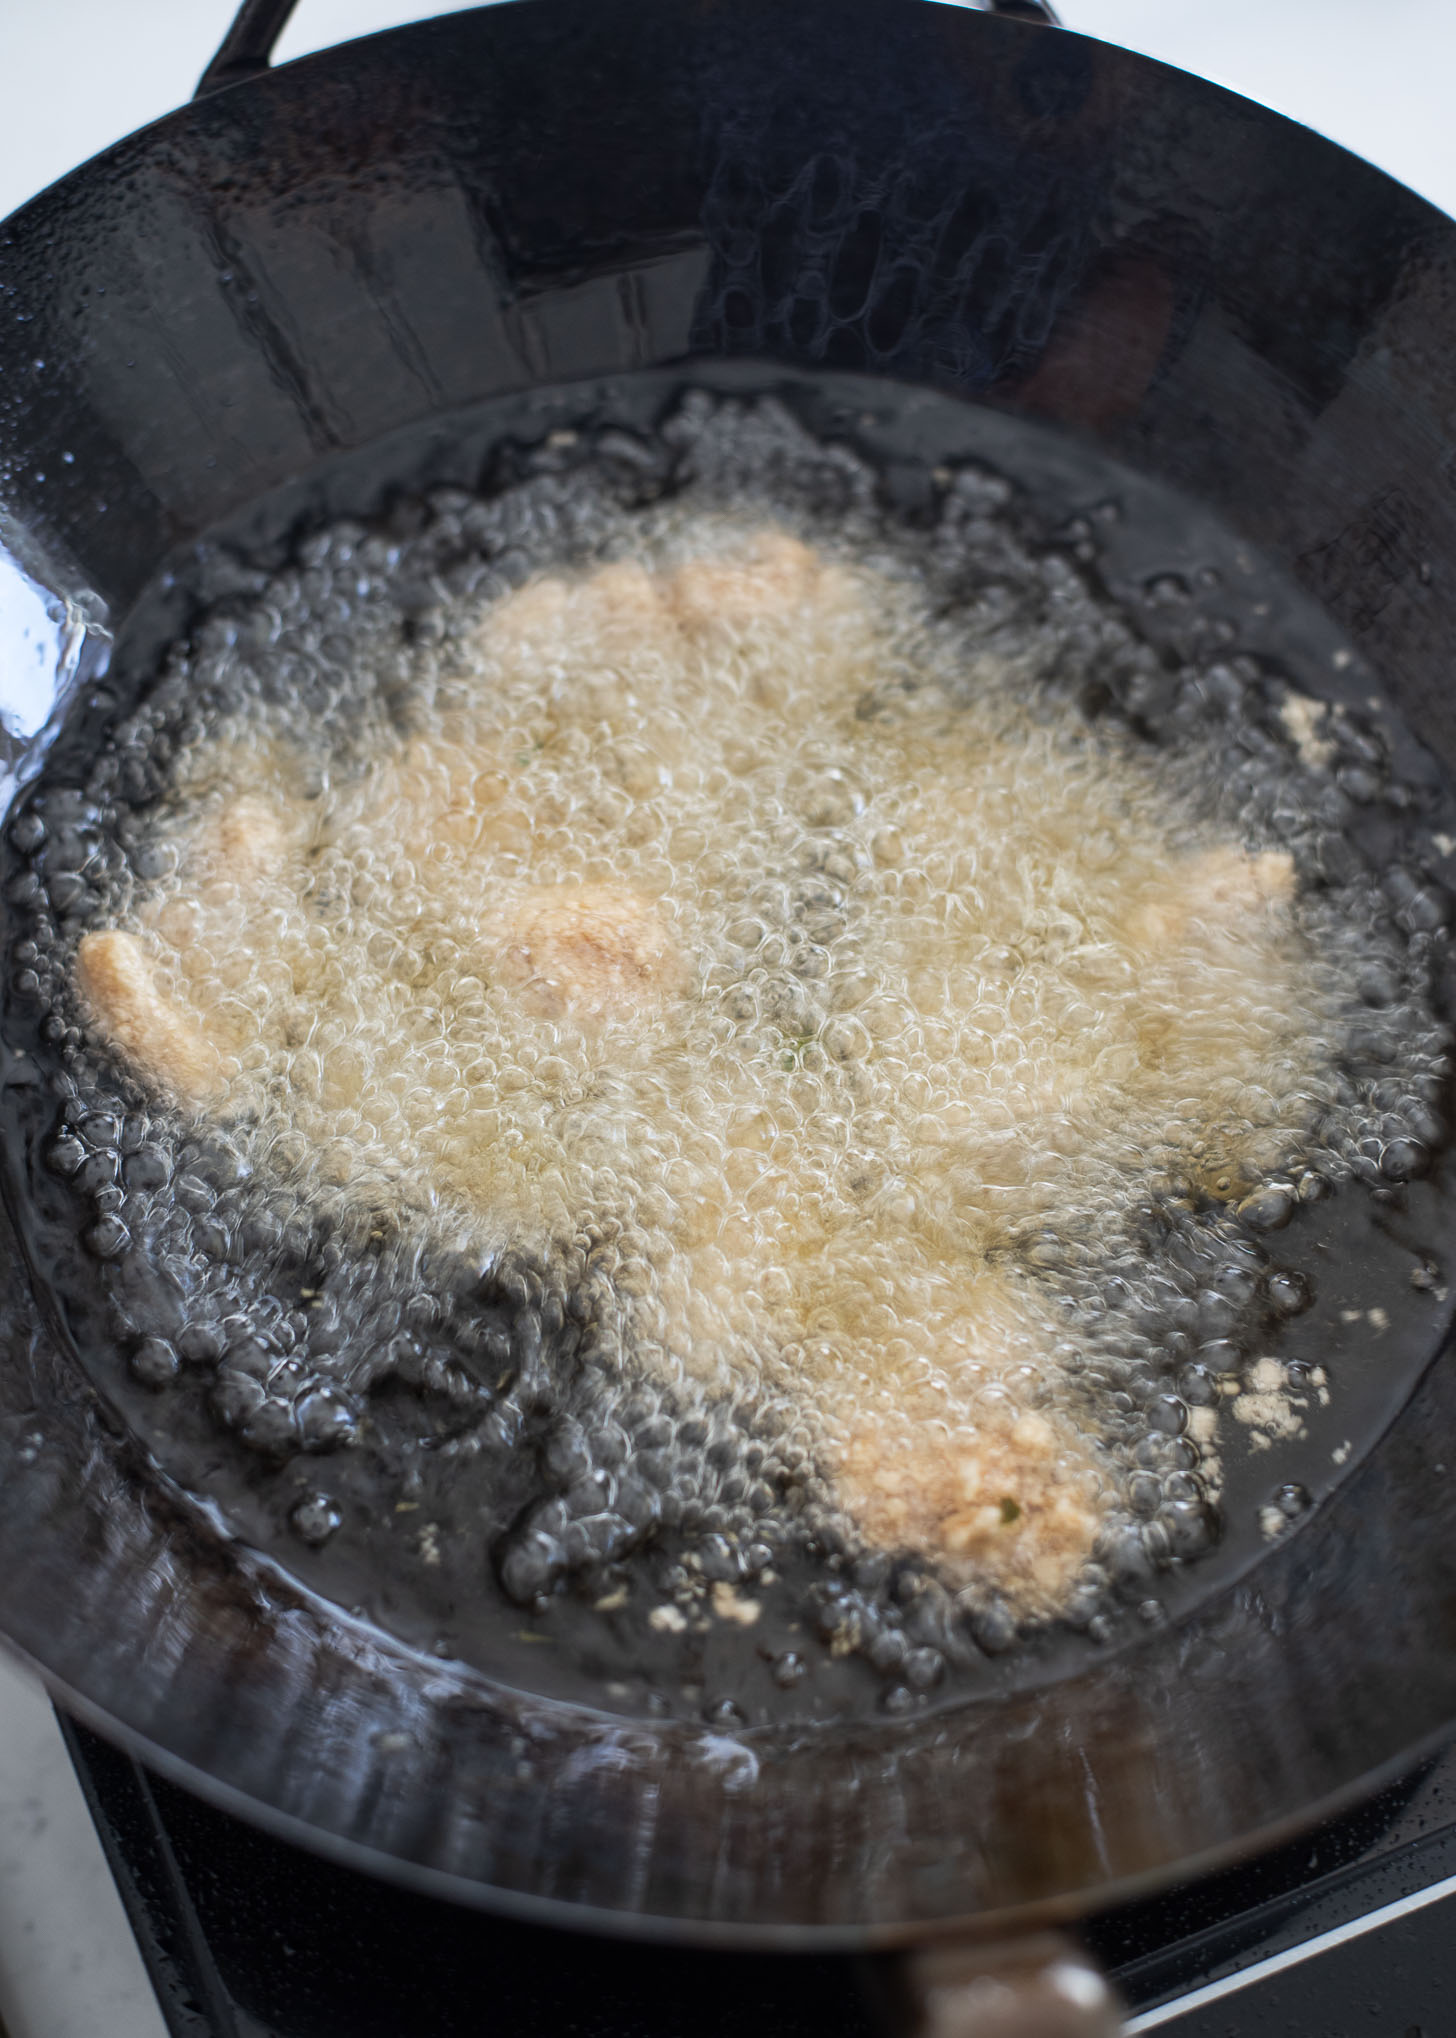 Chicken pieces are deep frying in hot oil in a wok.